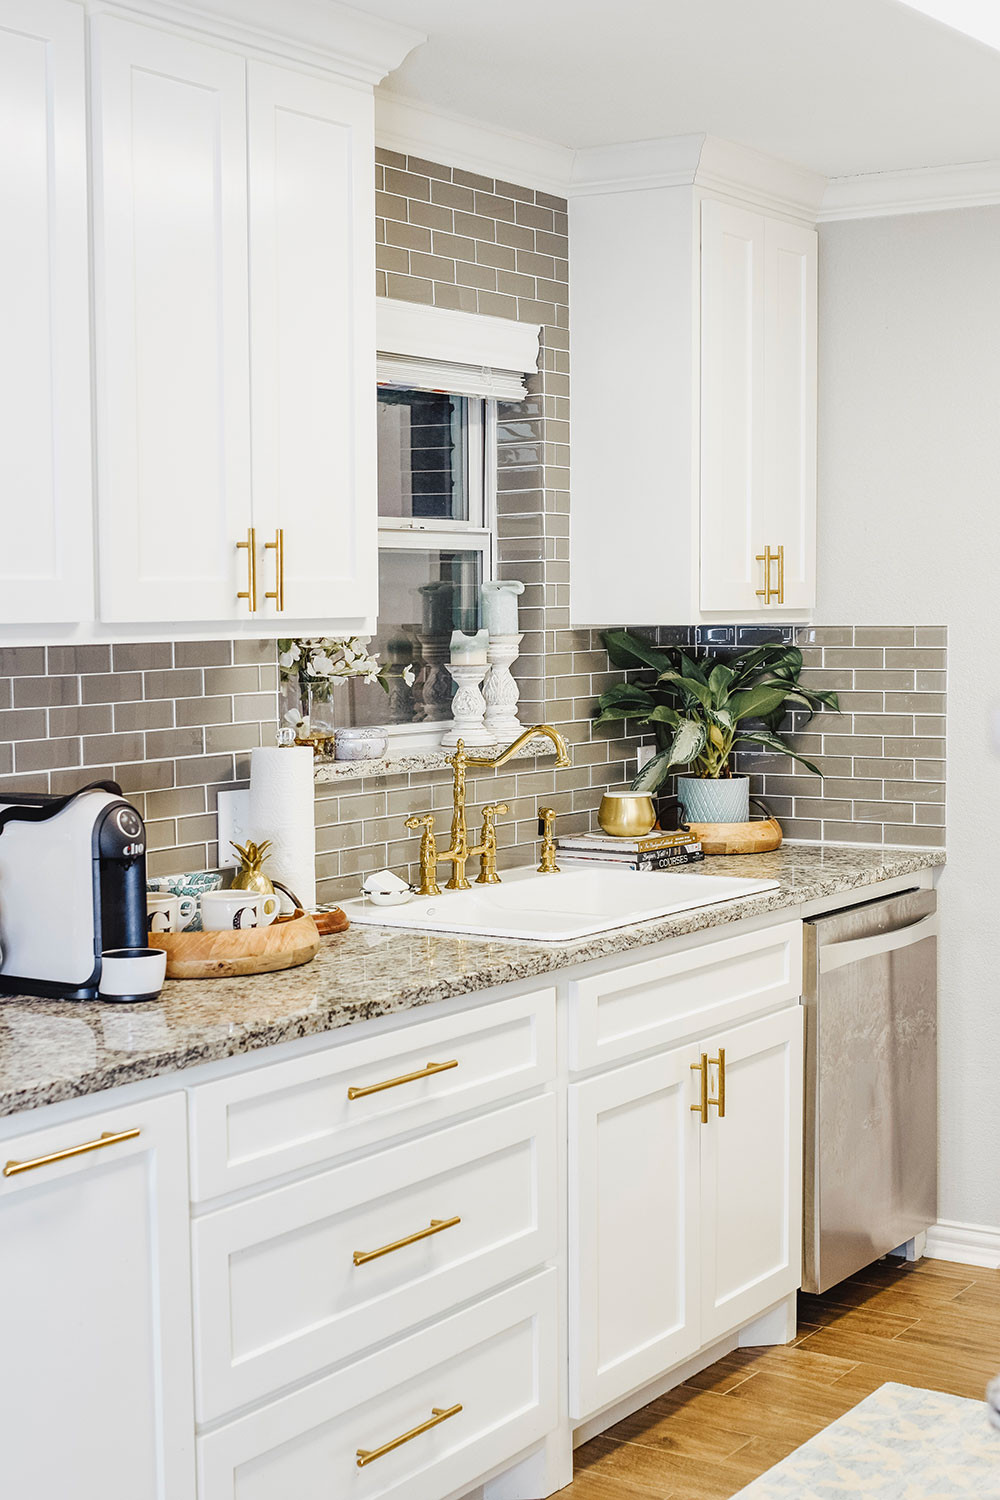 Small Kitchen Sink Cabinets
 Our Kitchen Sink Woes Our Small Kitchen Reveal